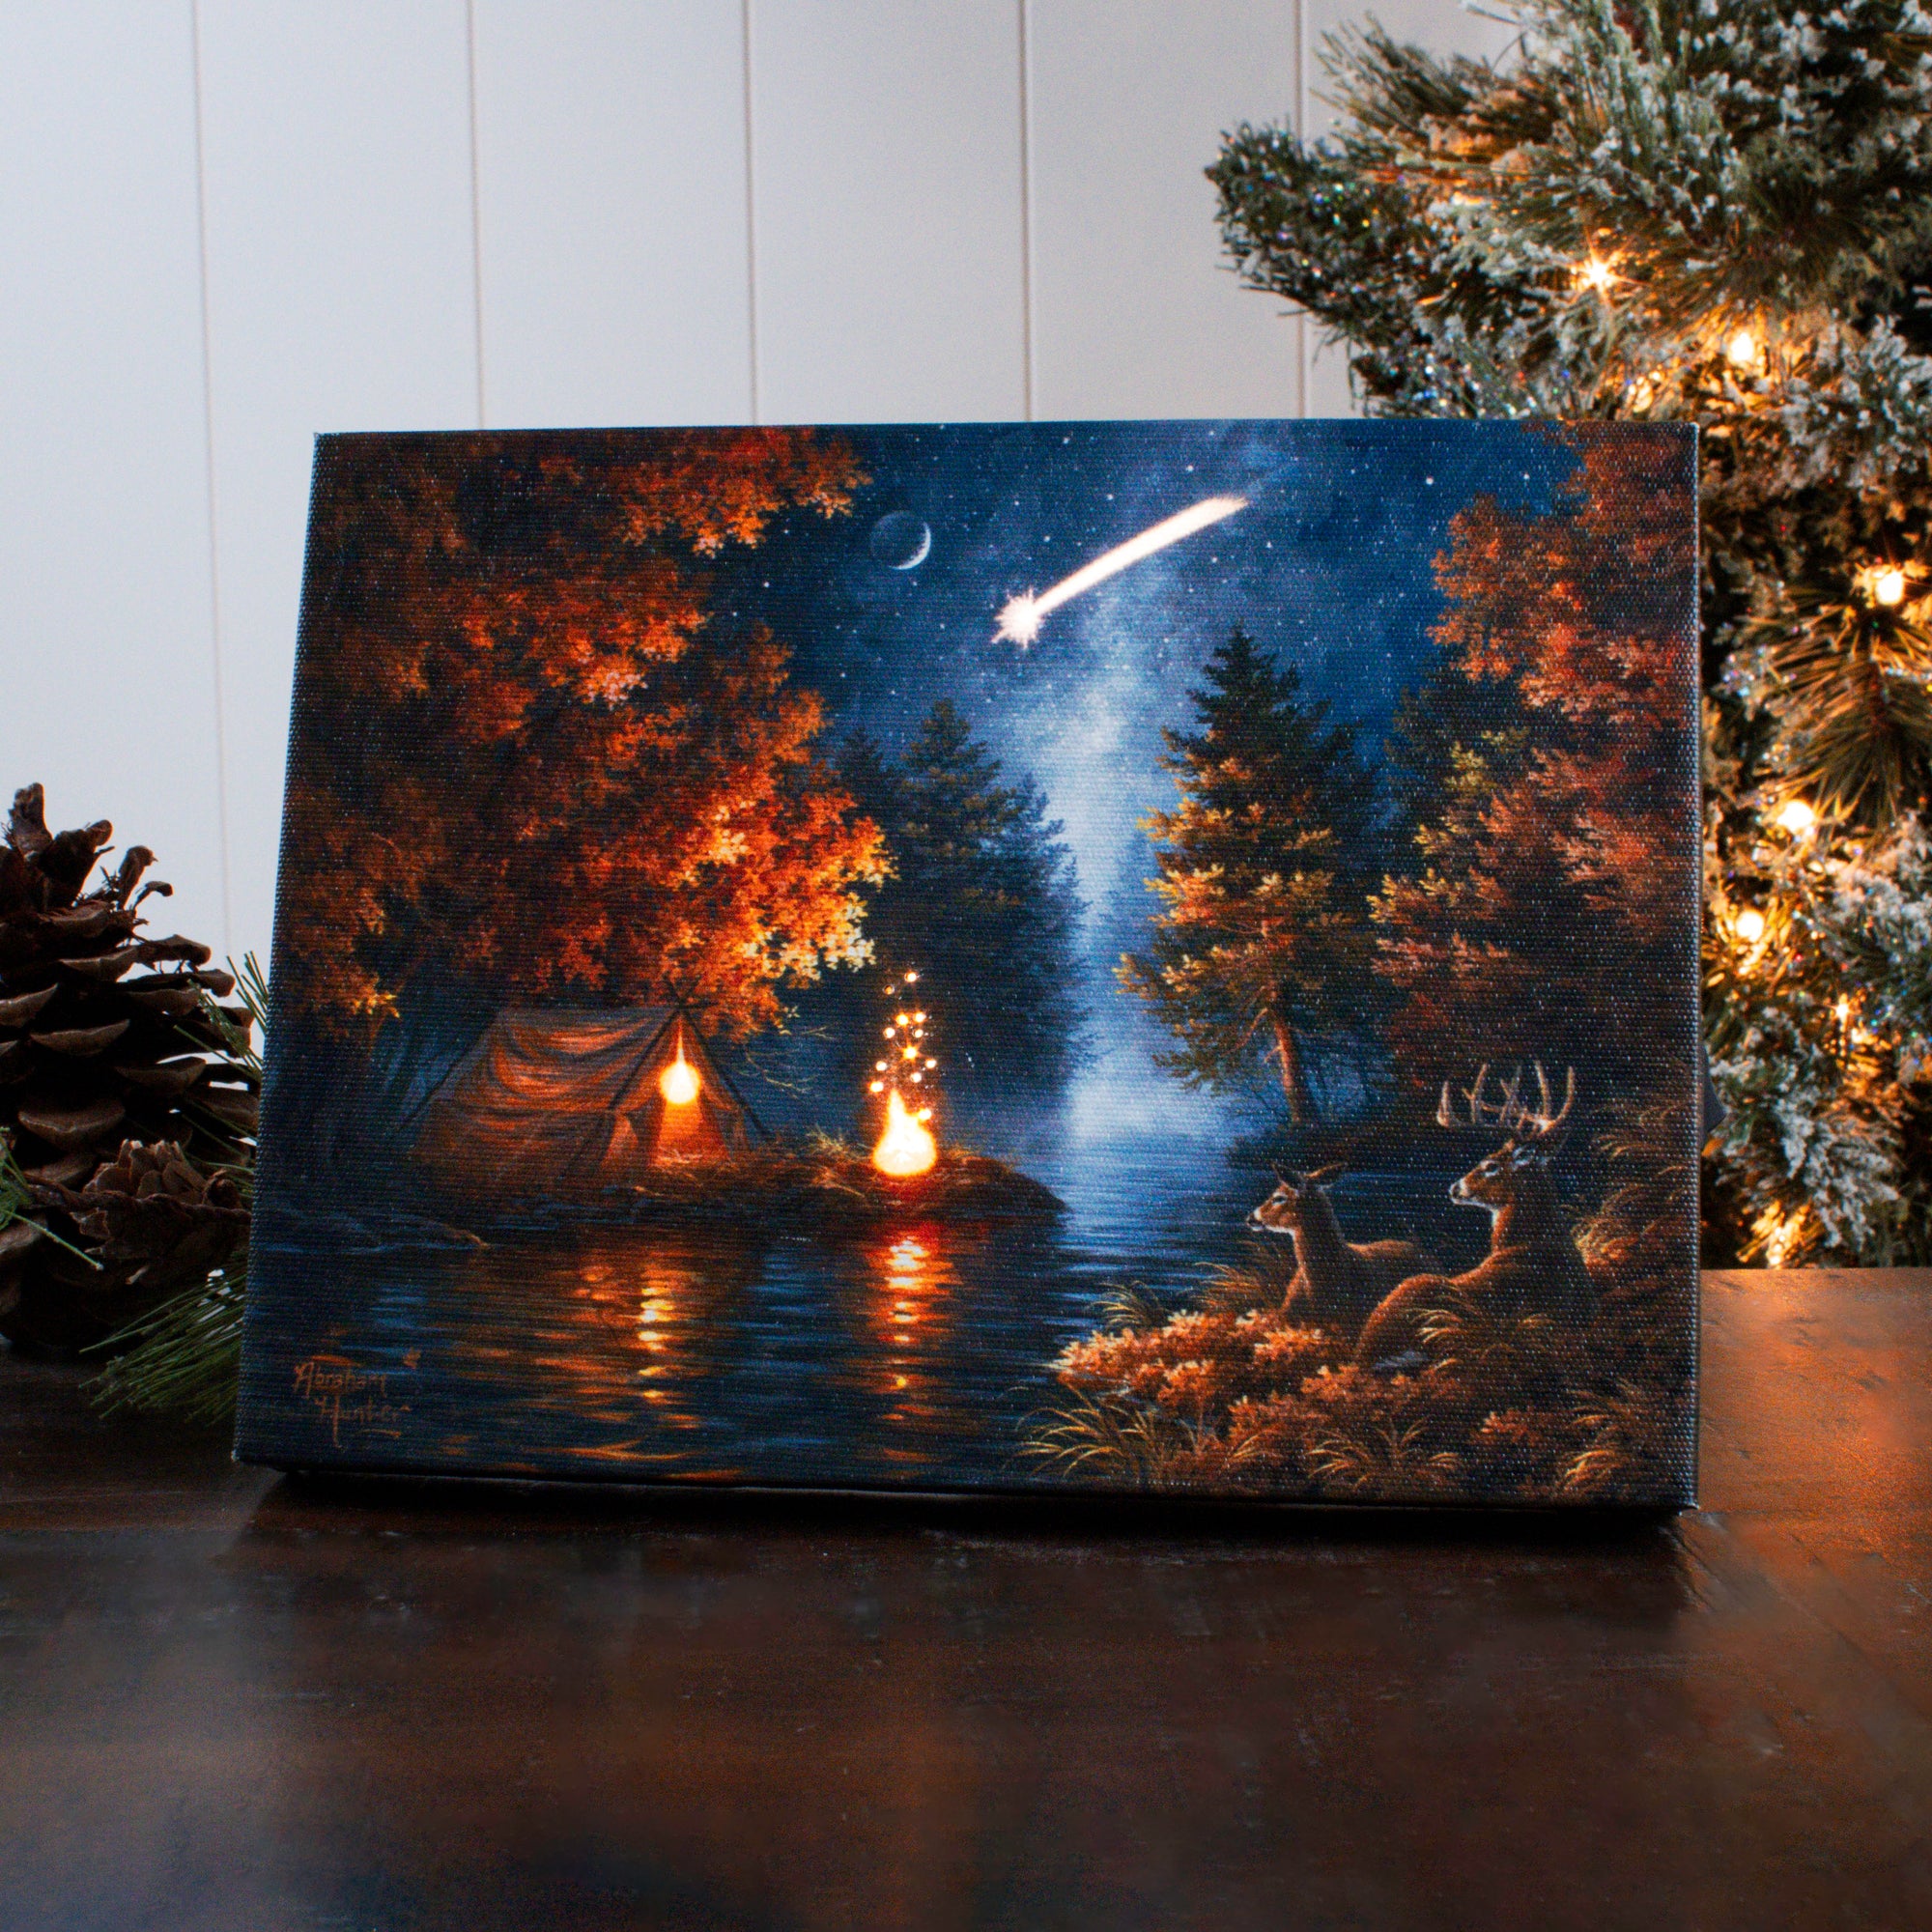 Wishing Upon a Star 8x6 Lighted Tabletop Canvas